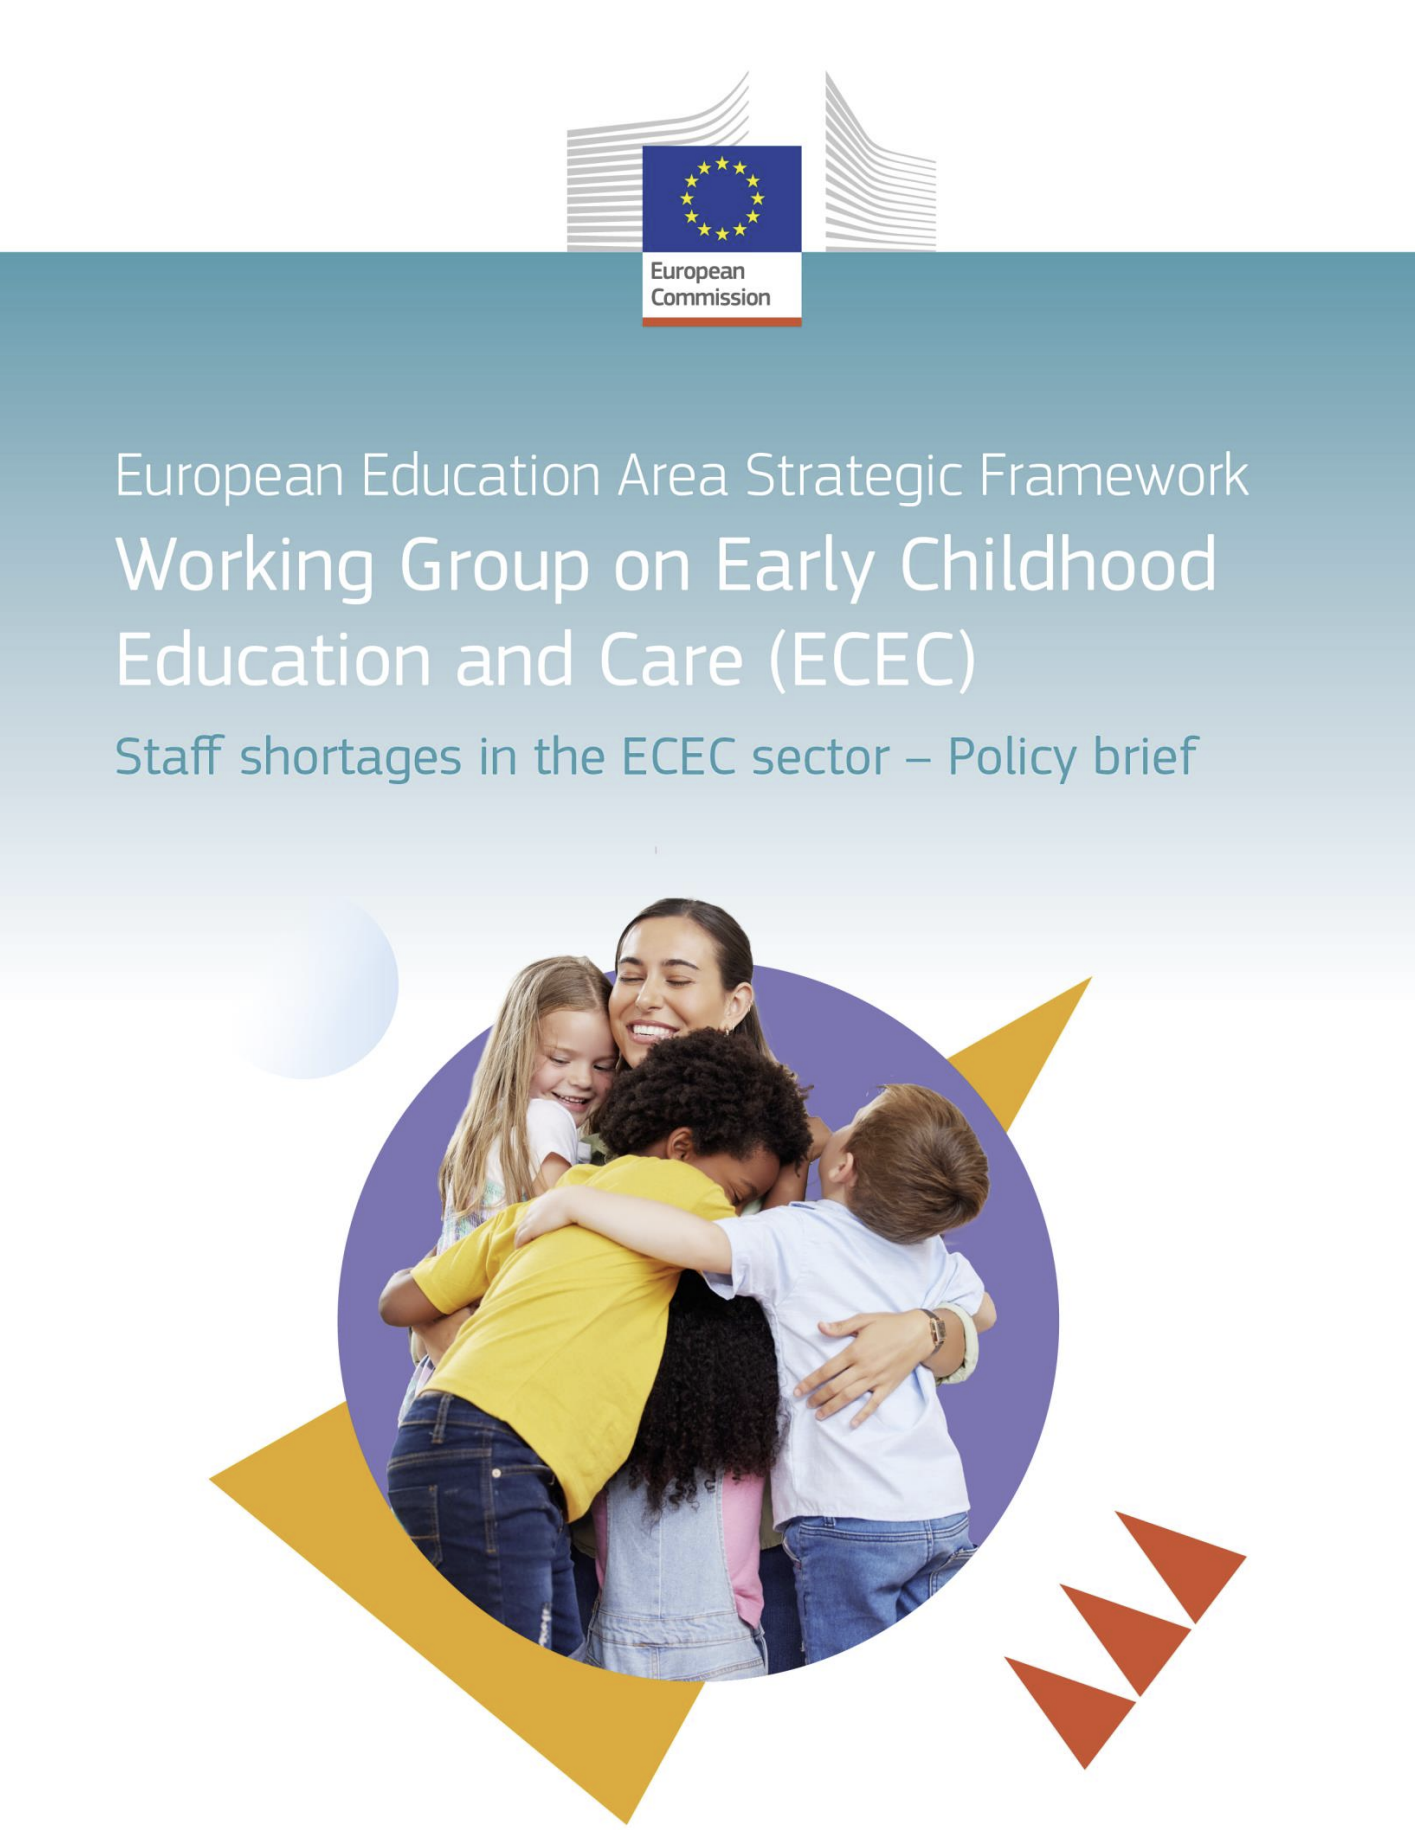 Staff shortages in Early Childhood Education and Care (ECEC) - Policy brief